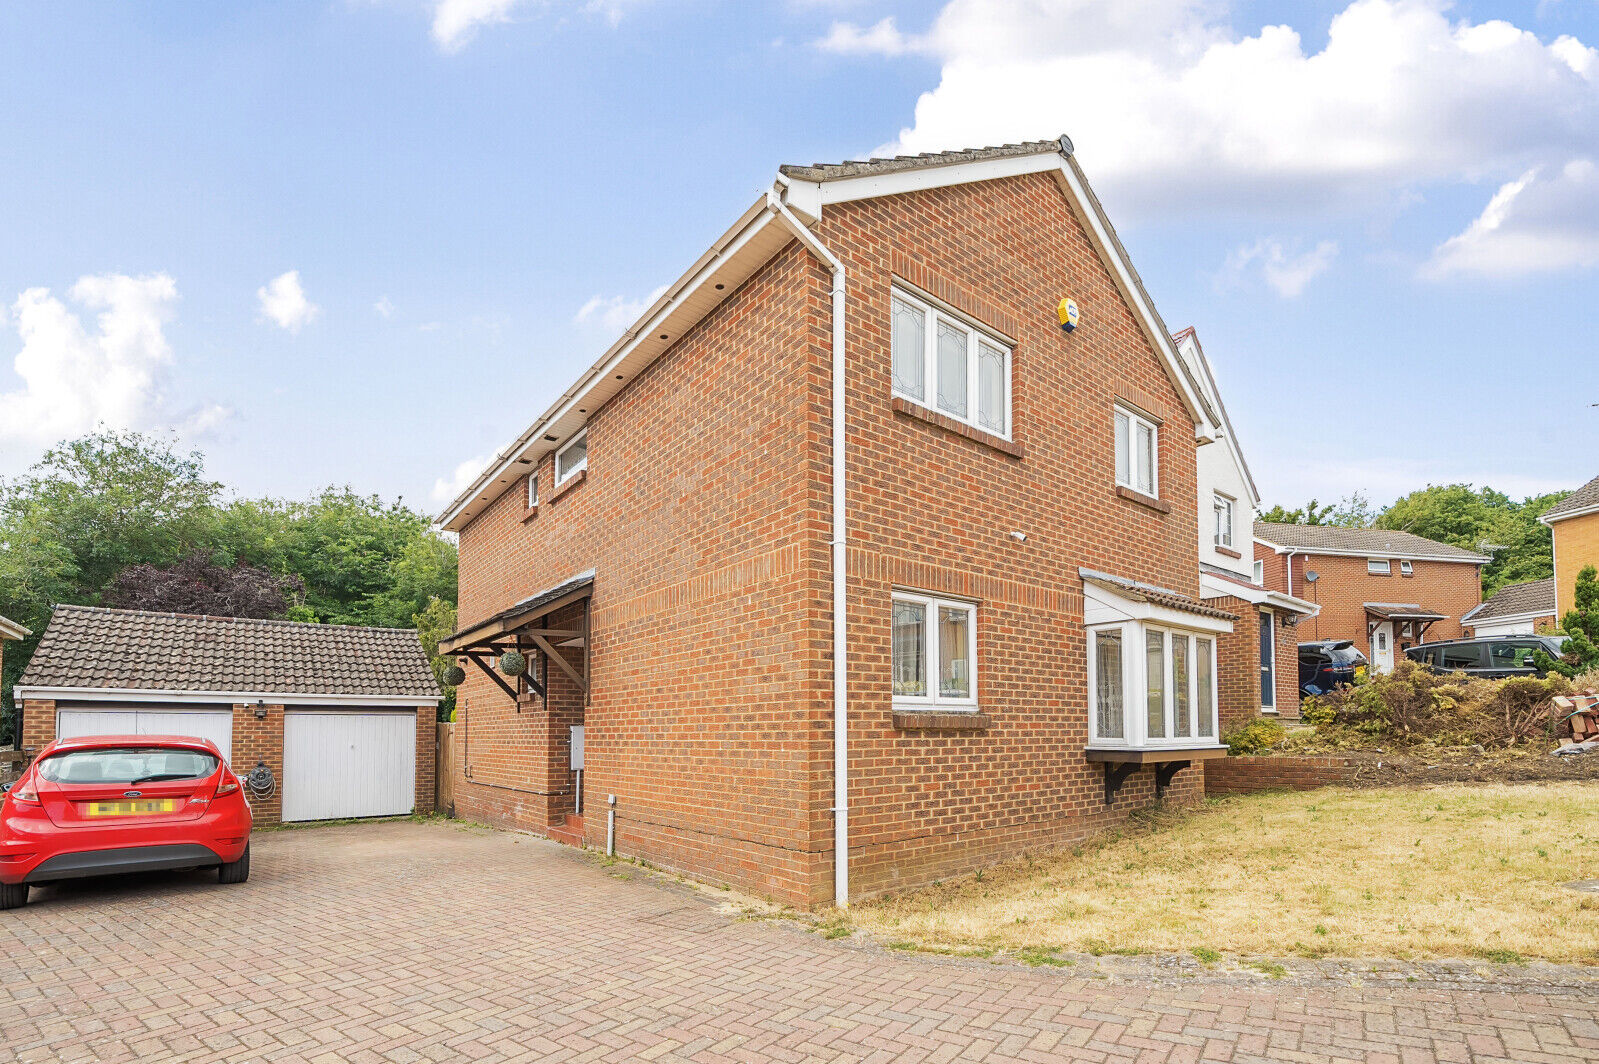 4 bedroom detached house for sale Dove Close, Lower Earley, RG6, main image